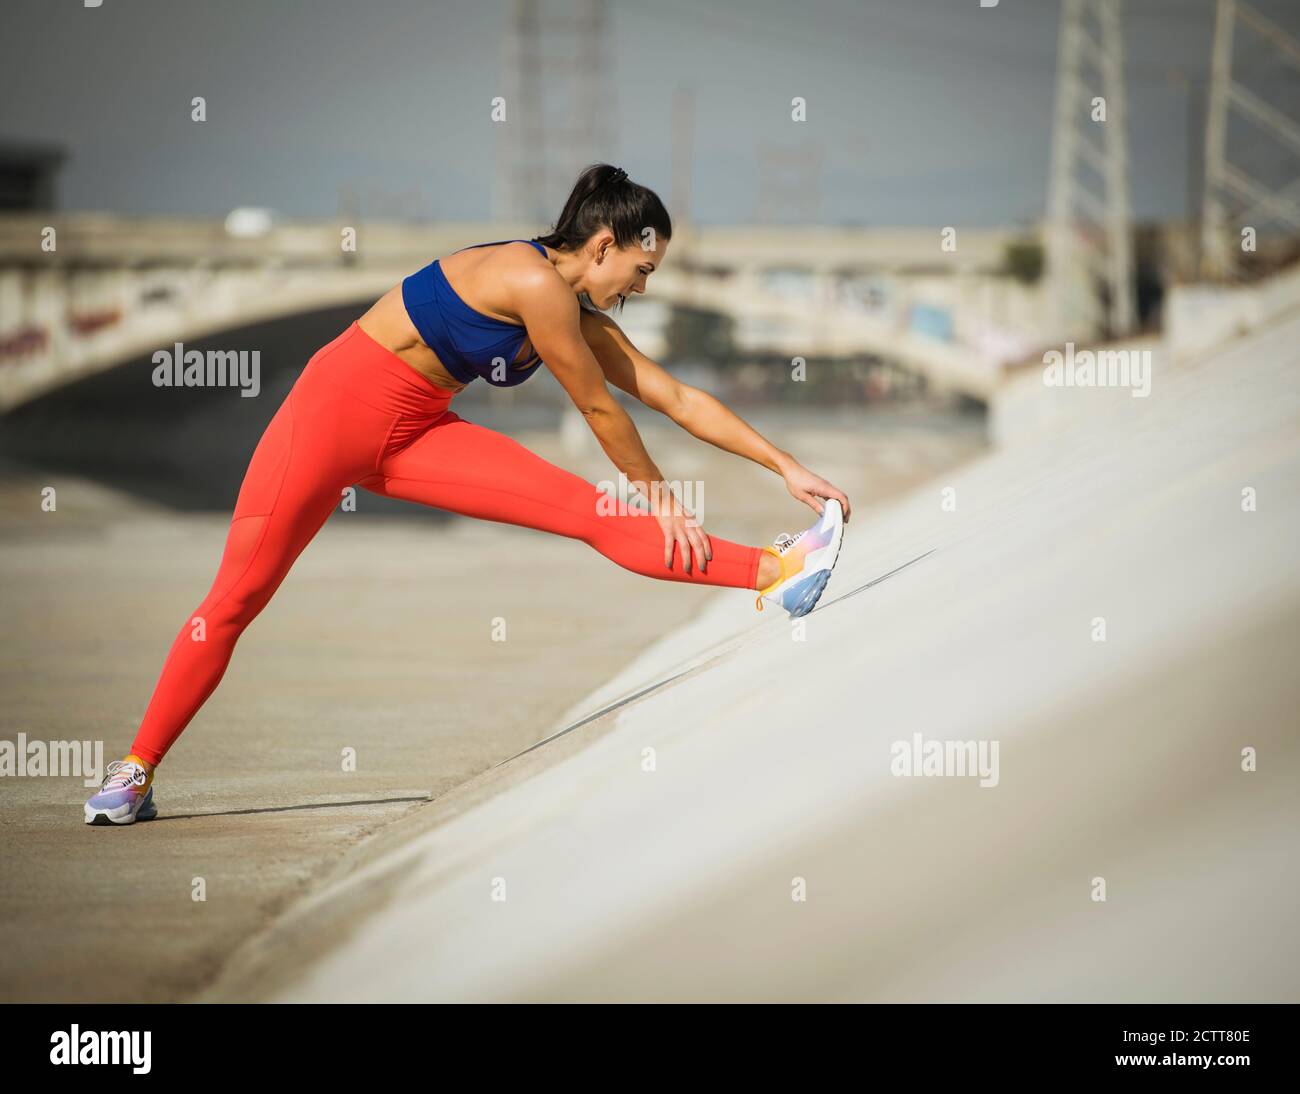 USA, California, Los Angeles, Sporty woman stretching in urban setting Stock Photo